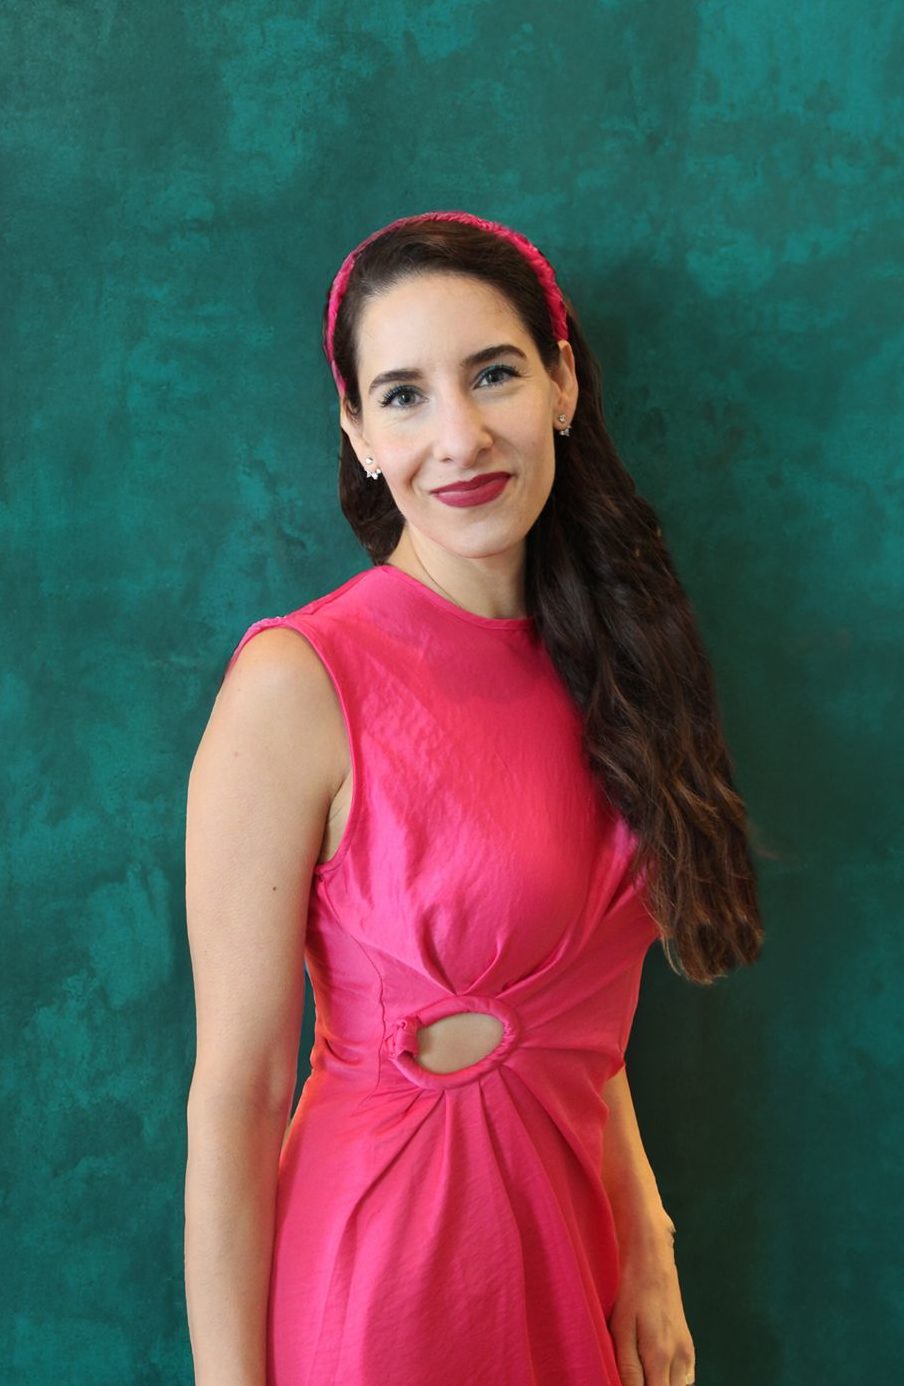 Latina woman with long hair held back by a pink headband gently smiling in a bright pink dress against a teal wall.